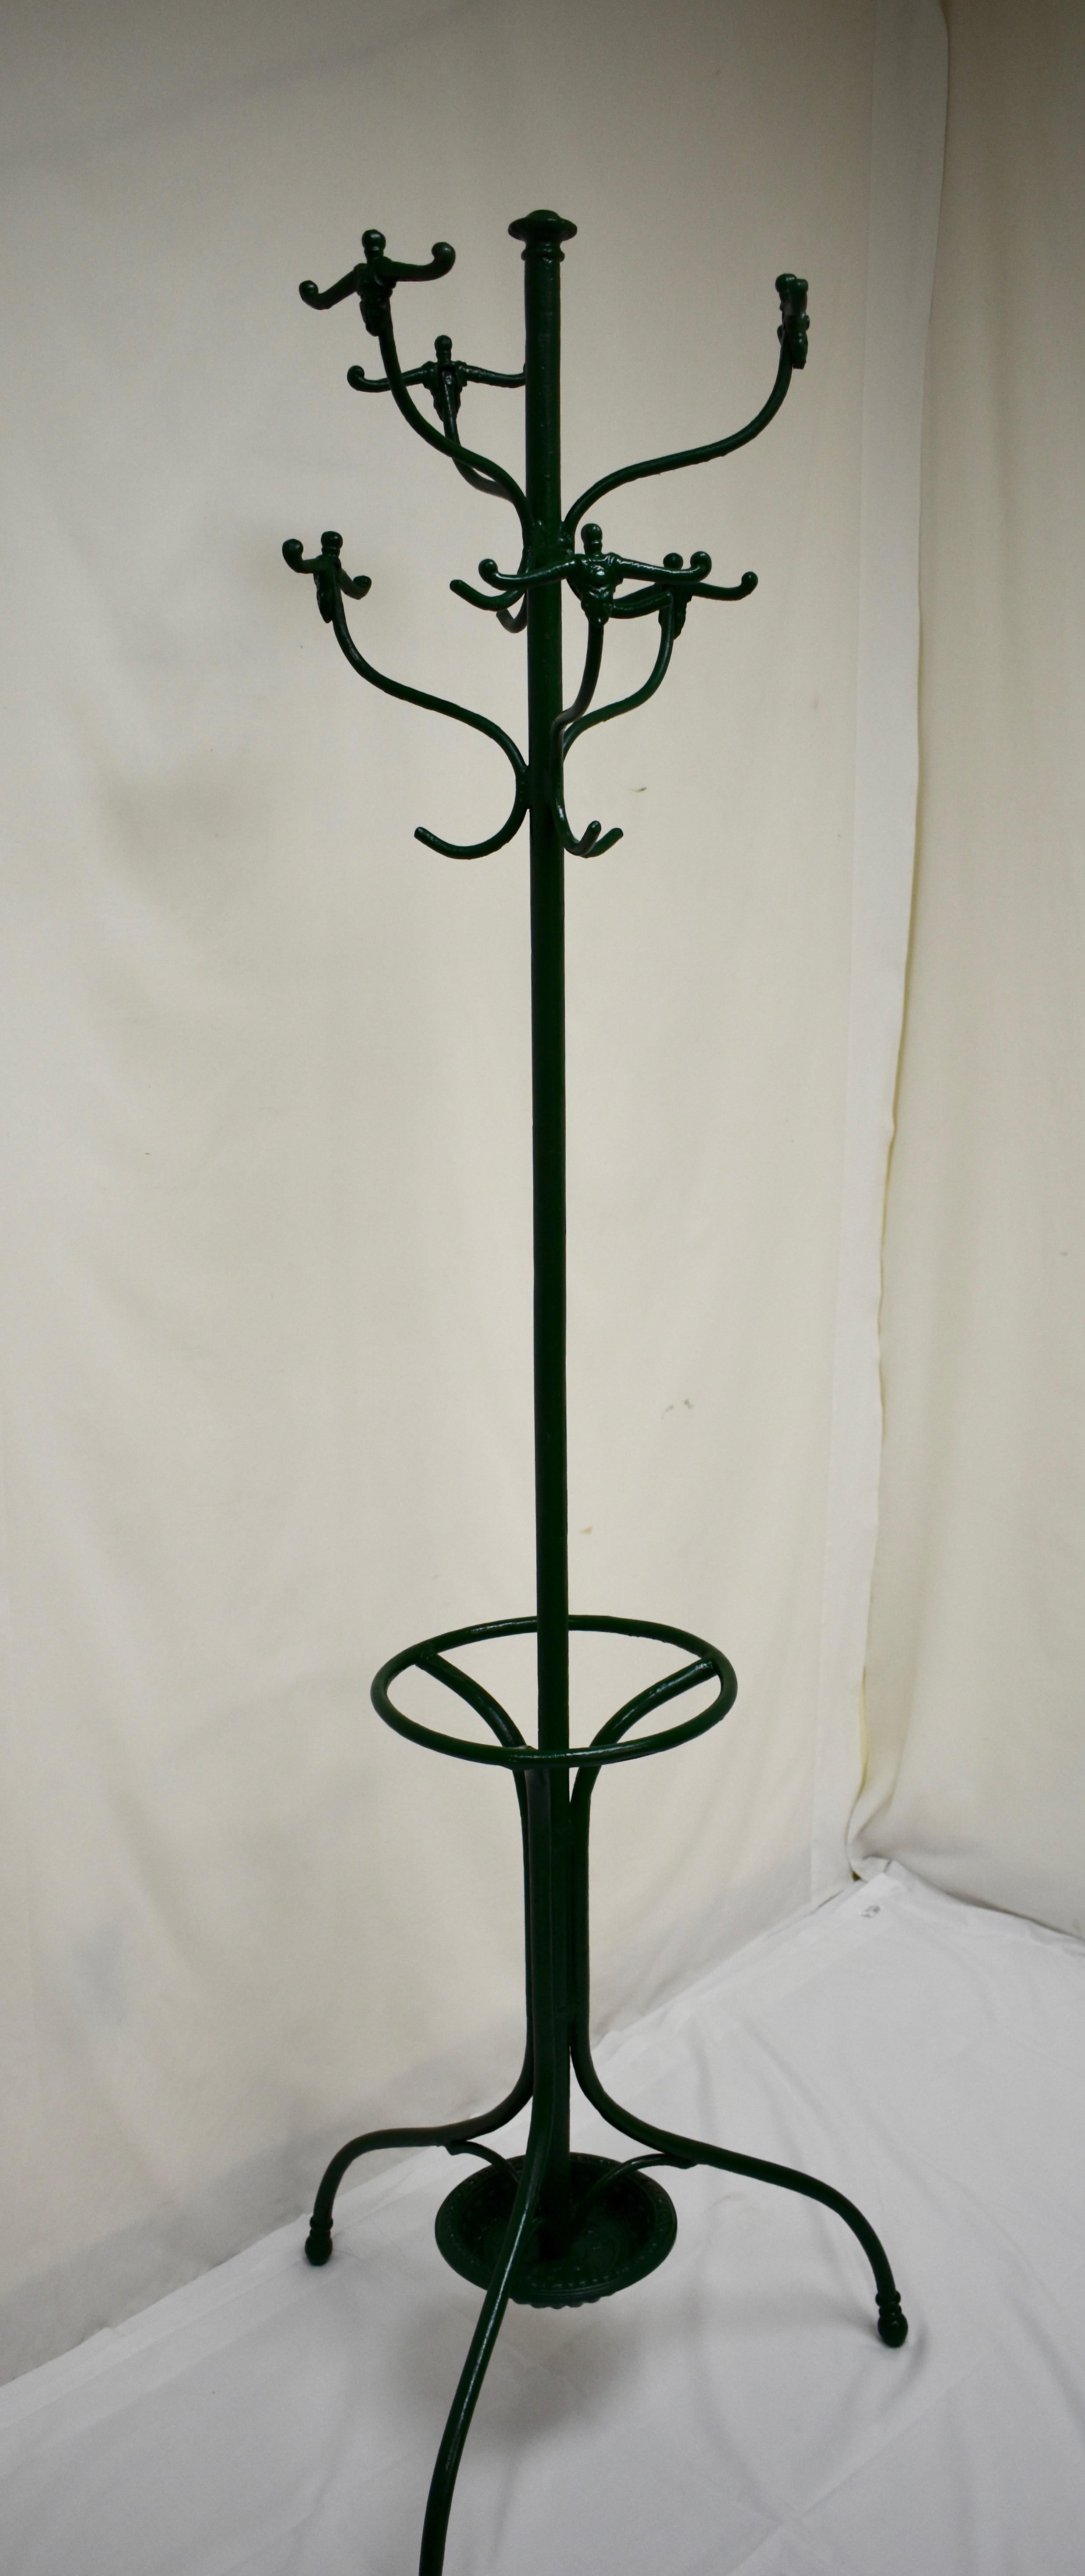 This is a nice example of the classic early 20th century central European hall tree in wrought and cast iron. It features the usual anthropomorphic double hooks with single hooks trailing and a circular umbrella stand and drip tray. Recently